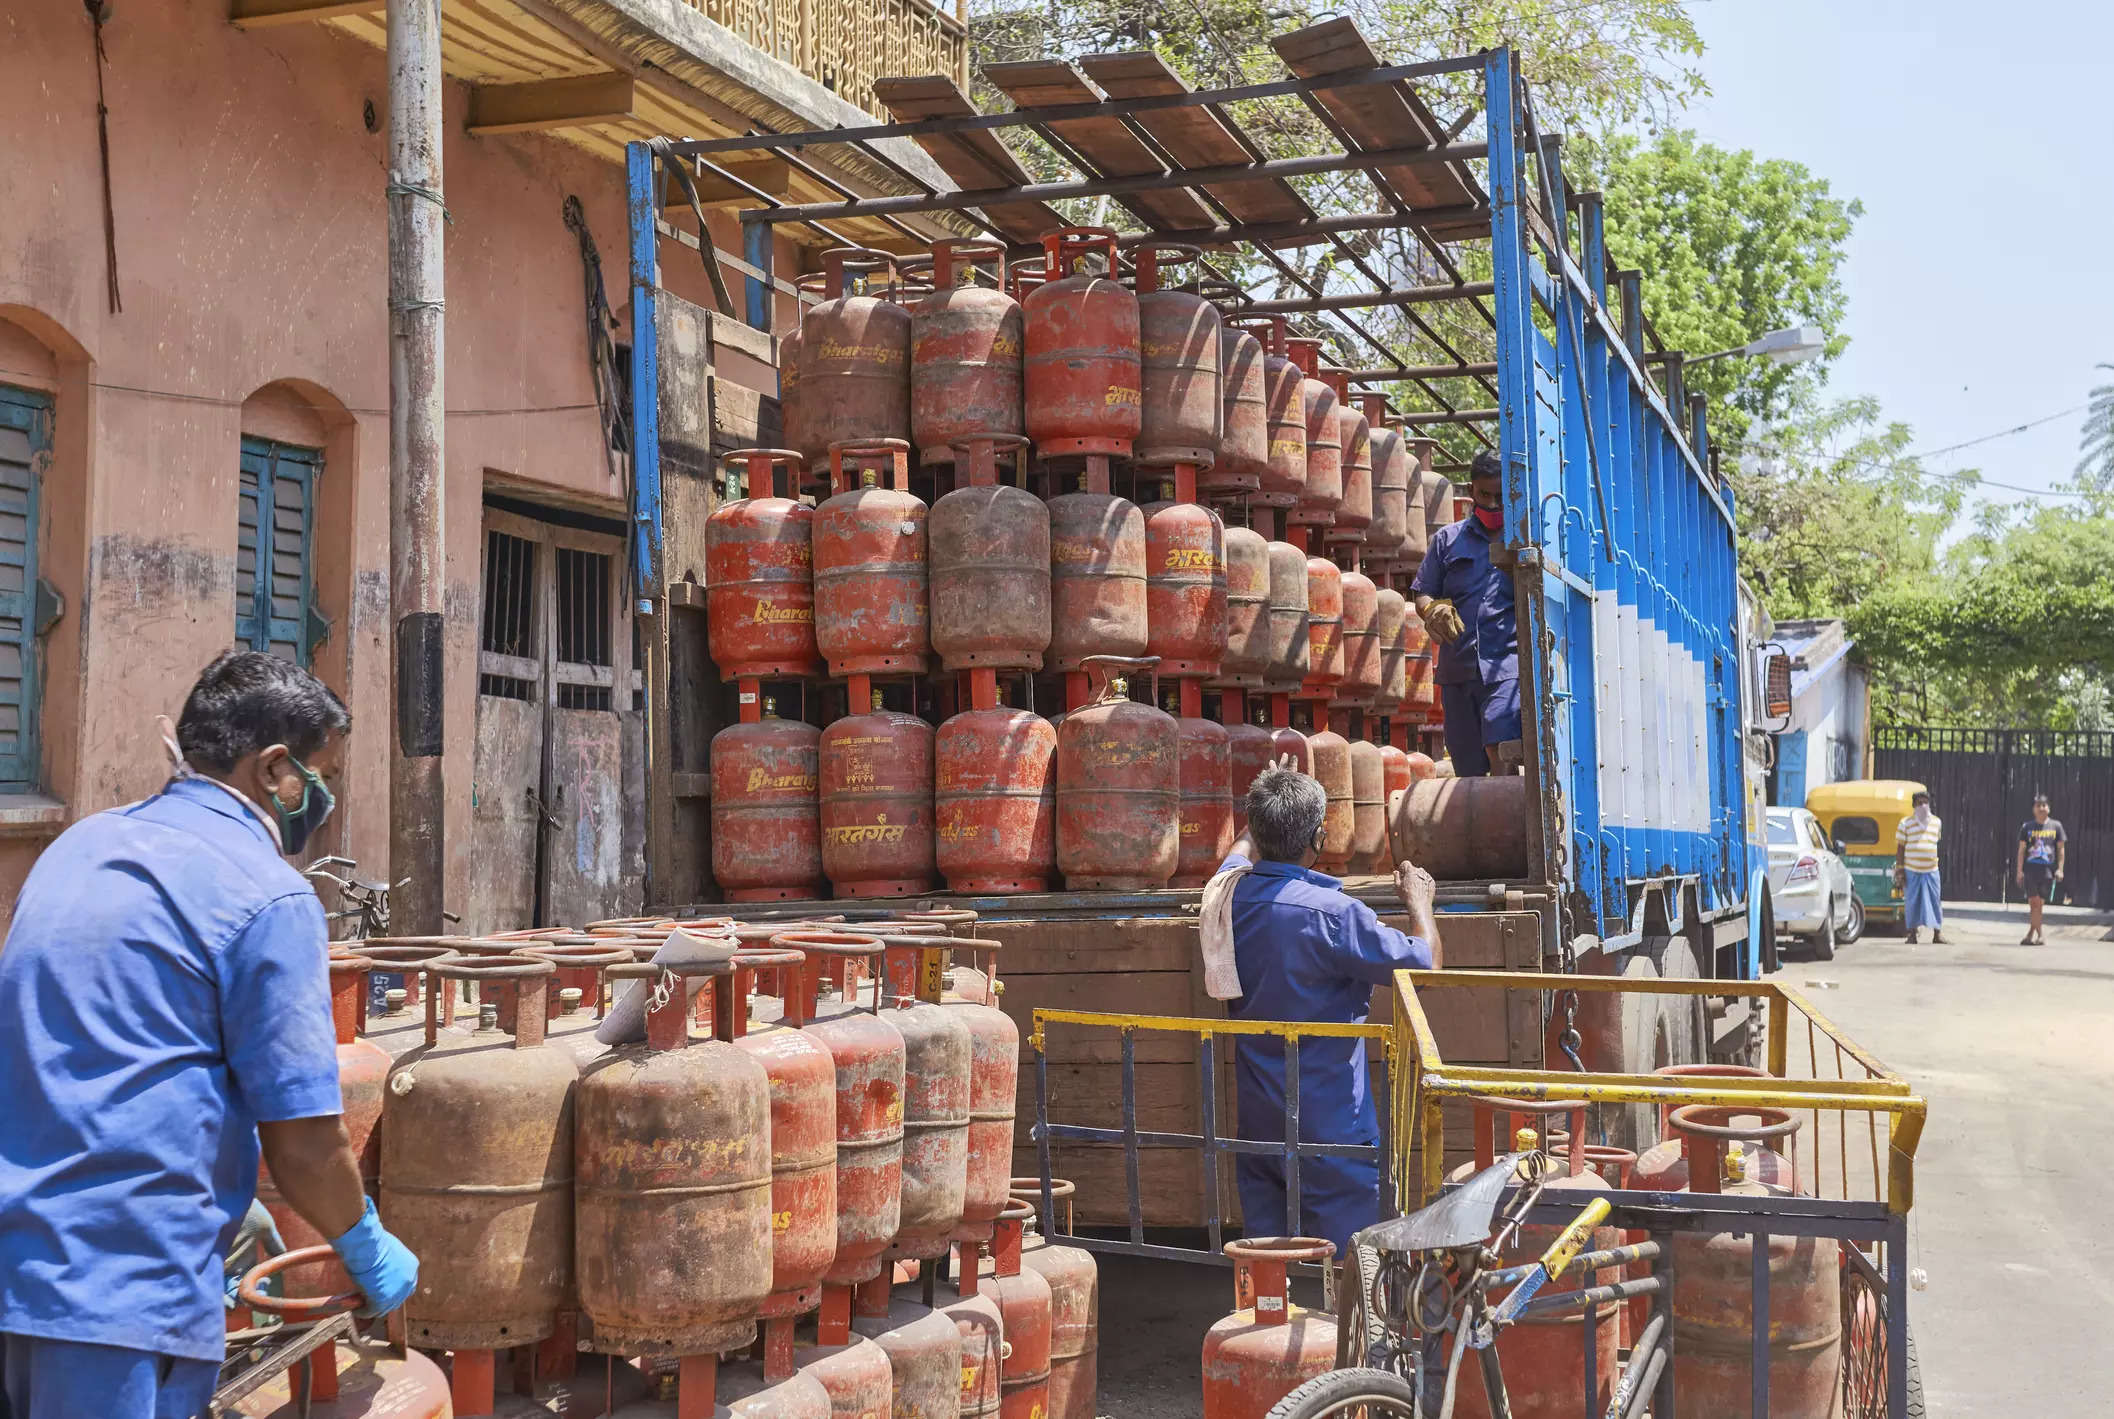  Commercial LPG rates are revised on 1st of every month after taking the average price in the preceding month.